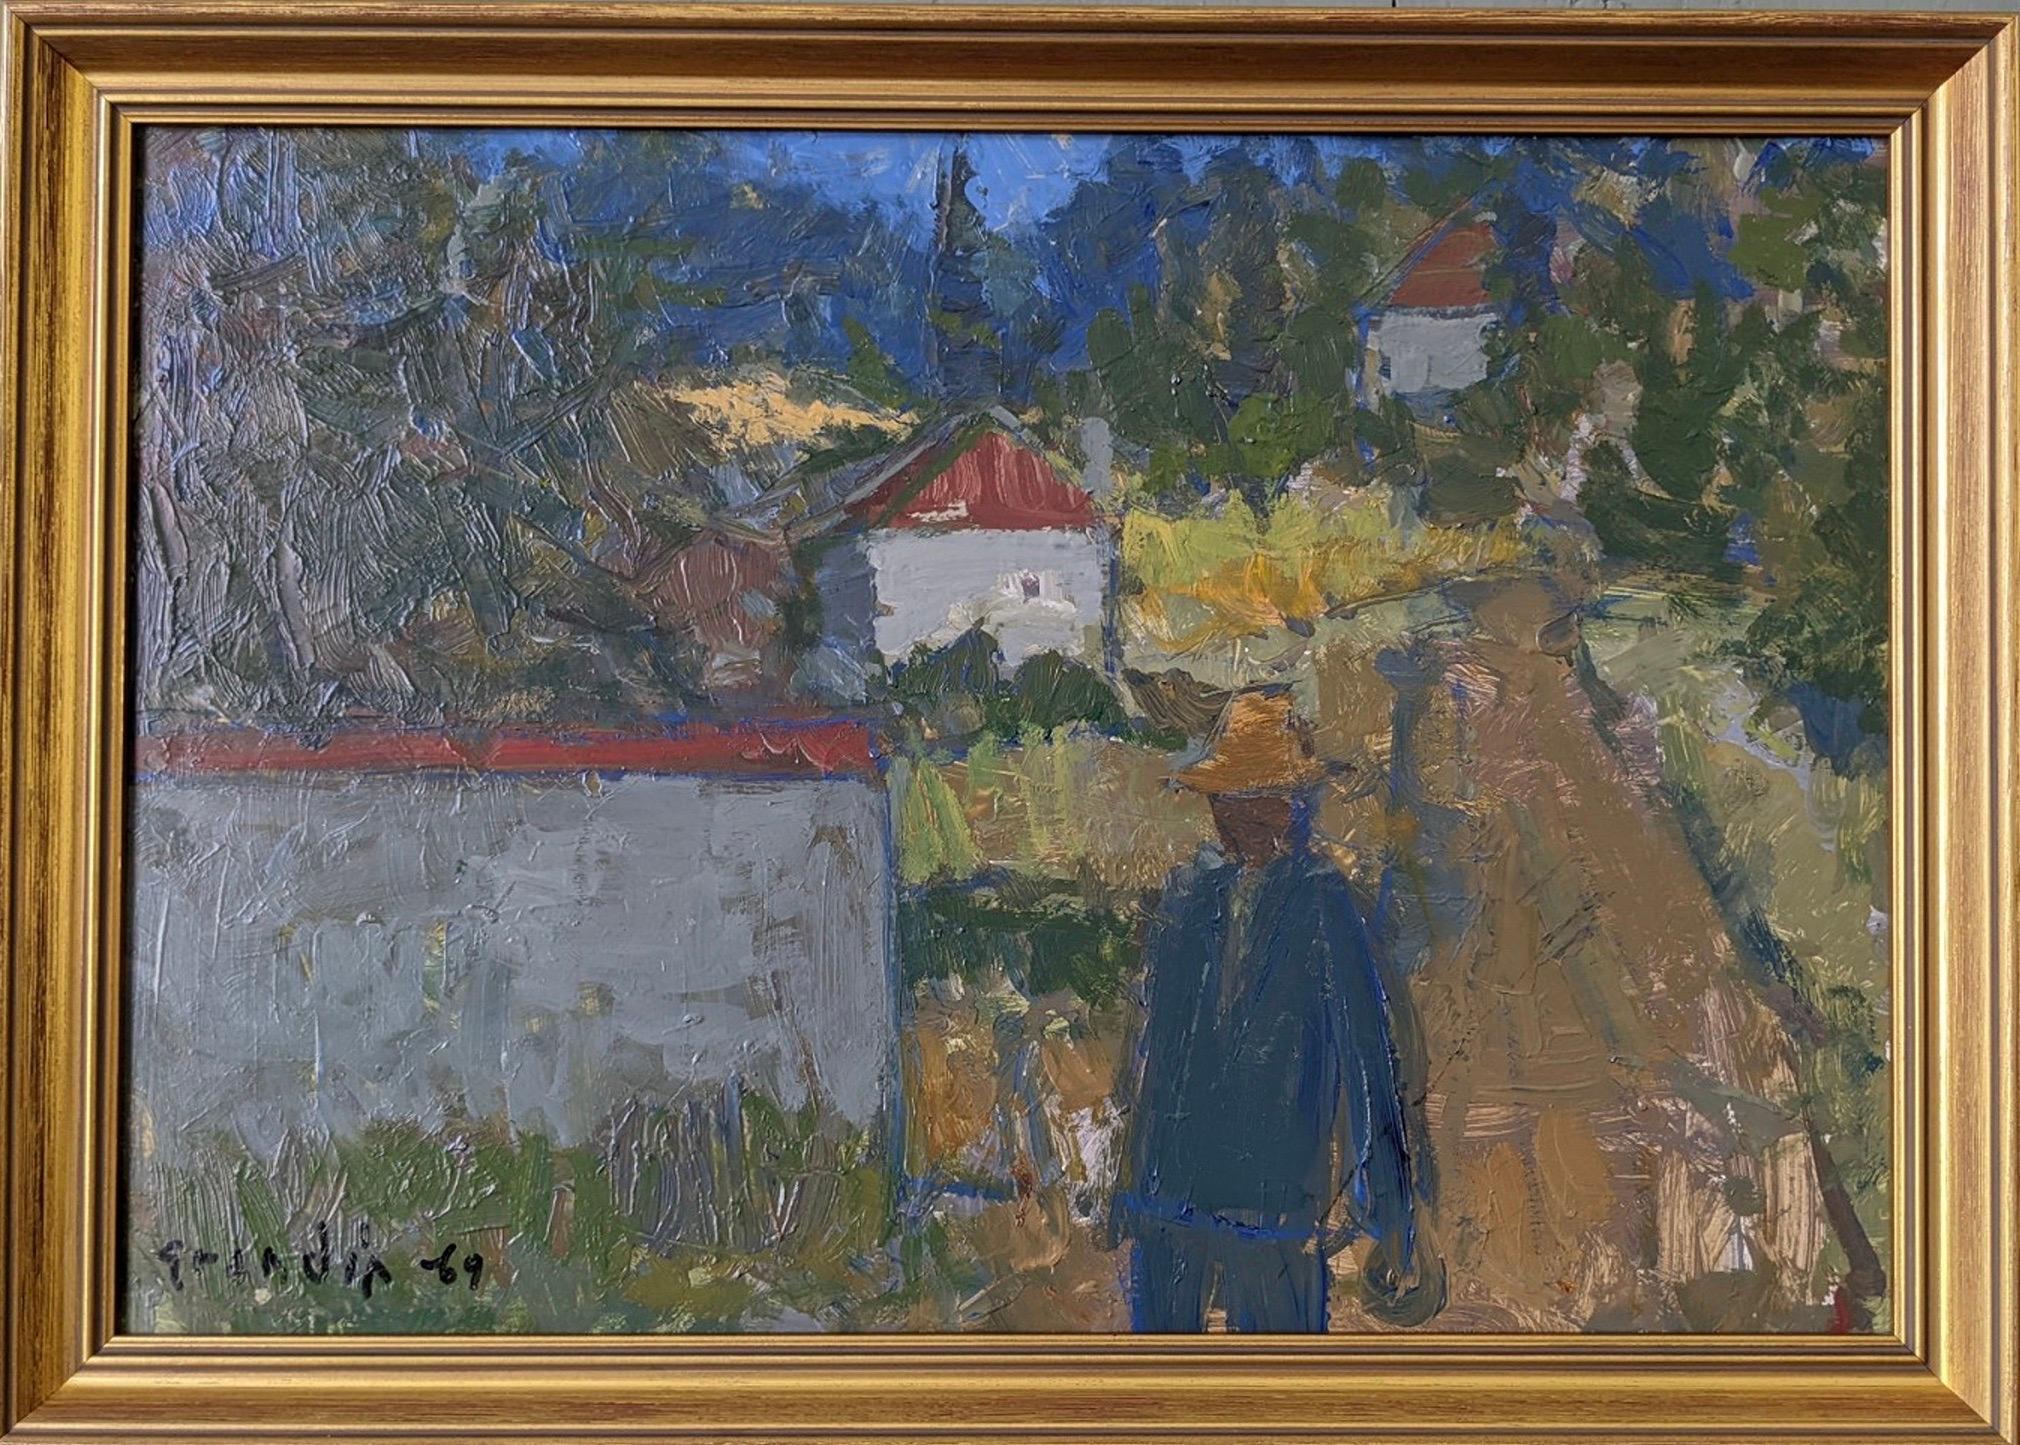 Landscape Painting Unknown - 1969 Vintage Mid-Century Expressive Street Scene Oil Painting - Forest Houses